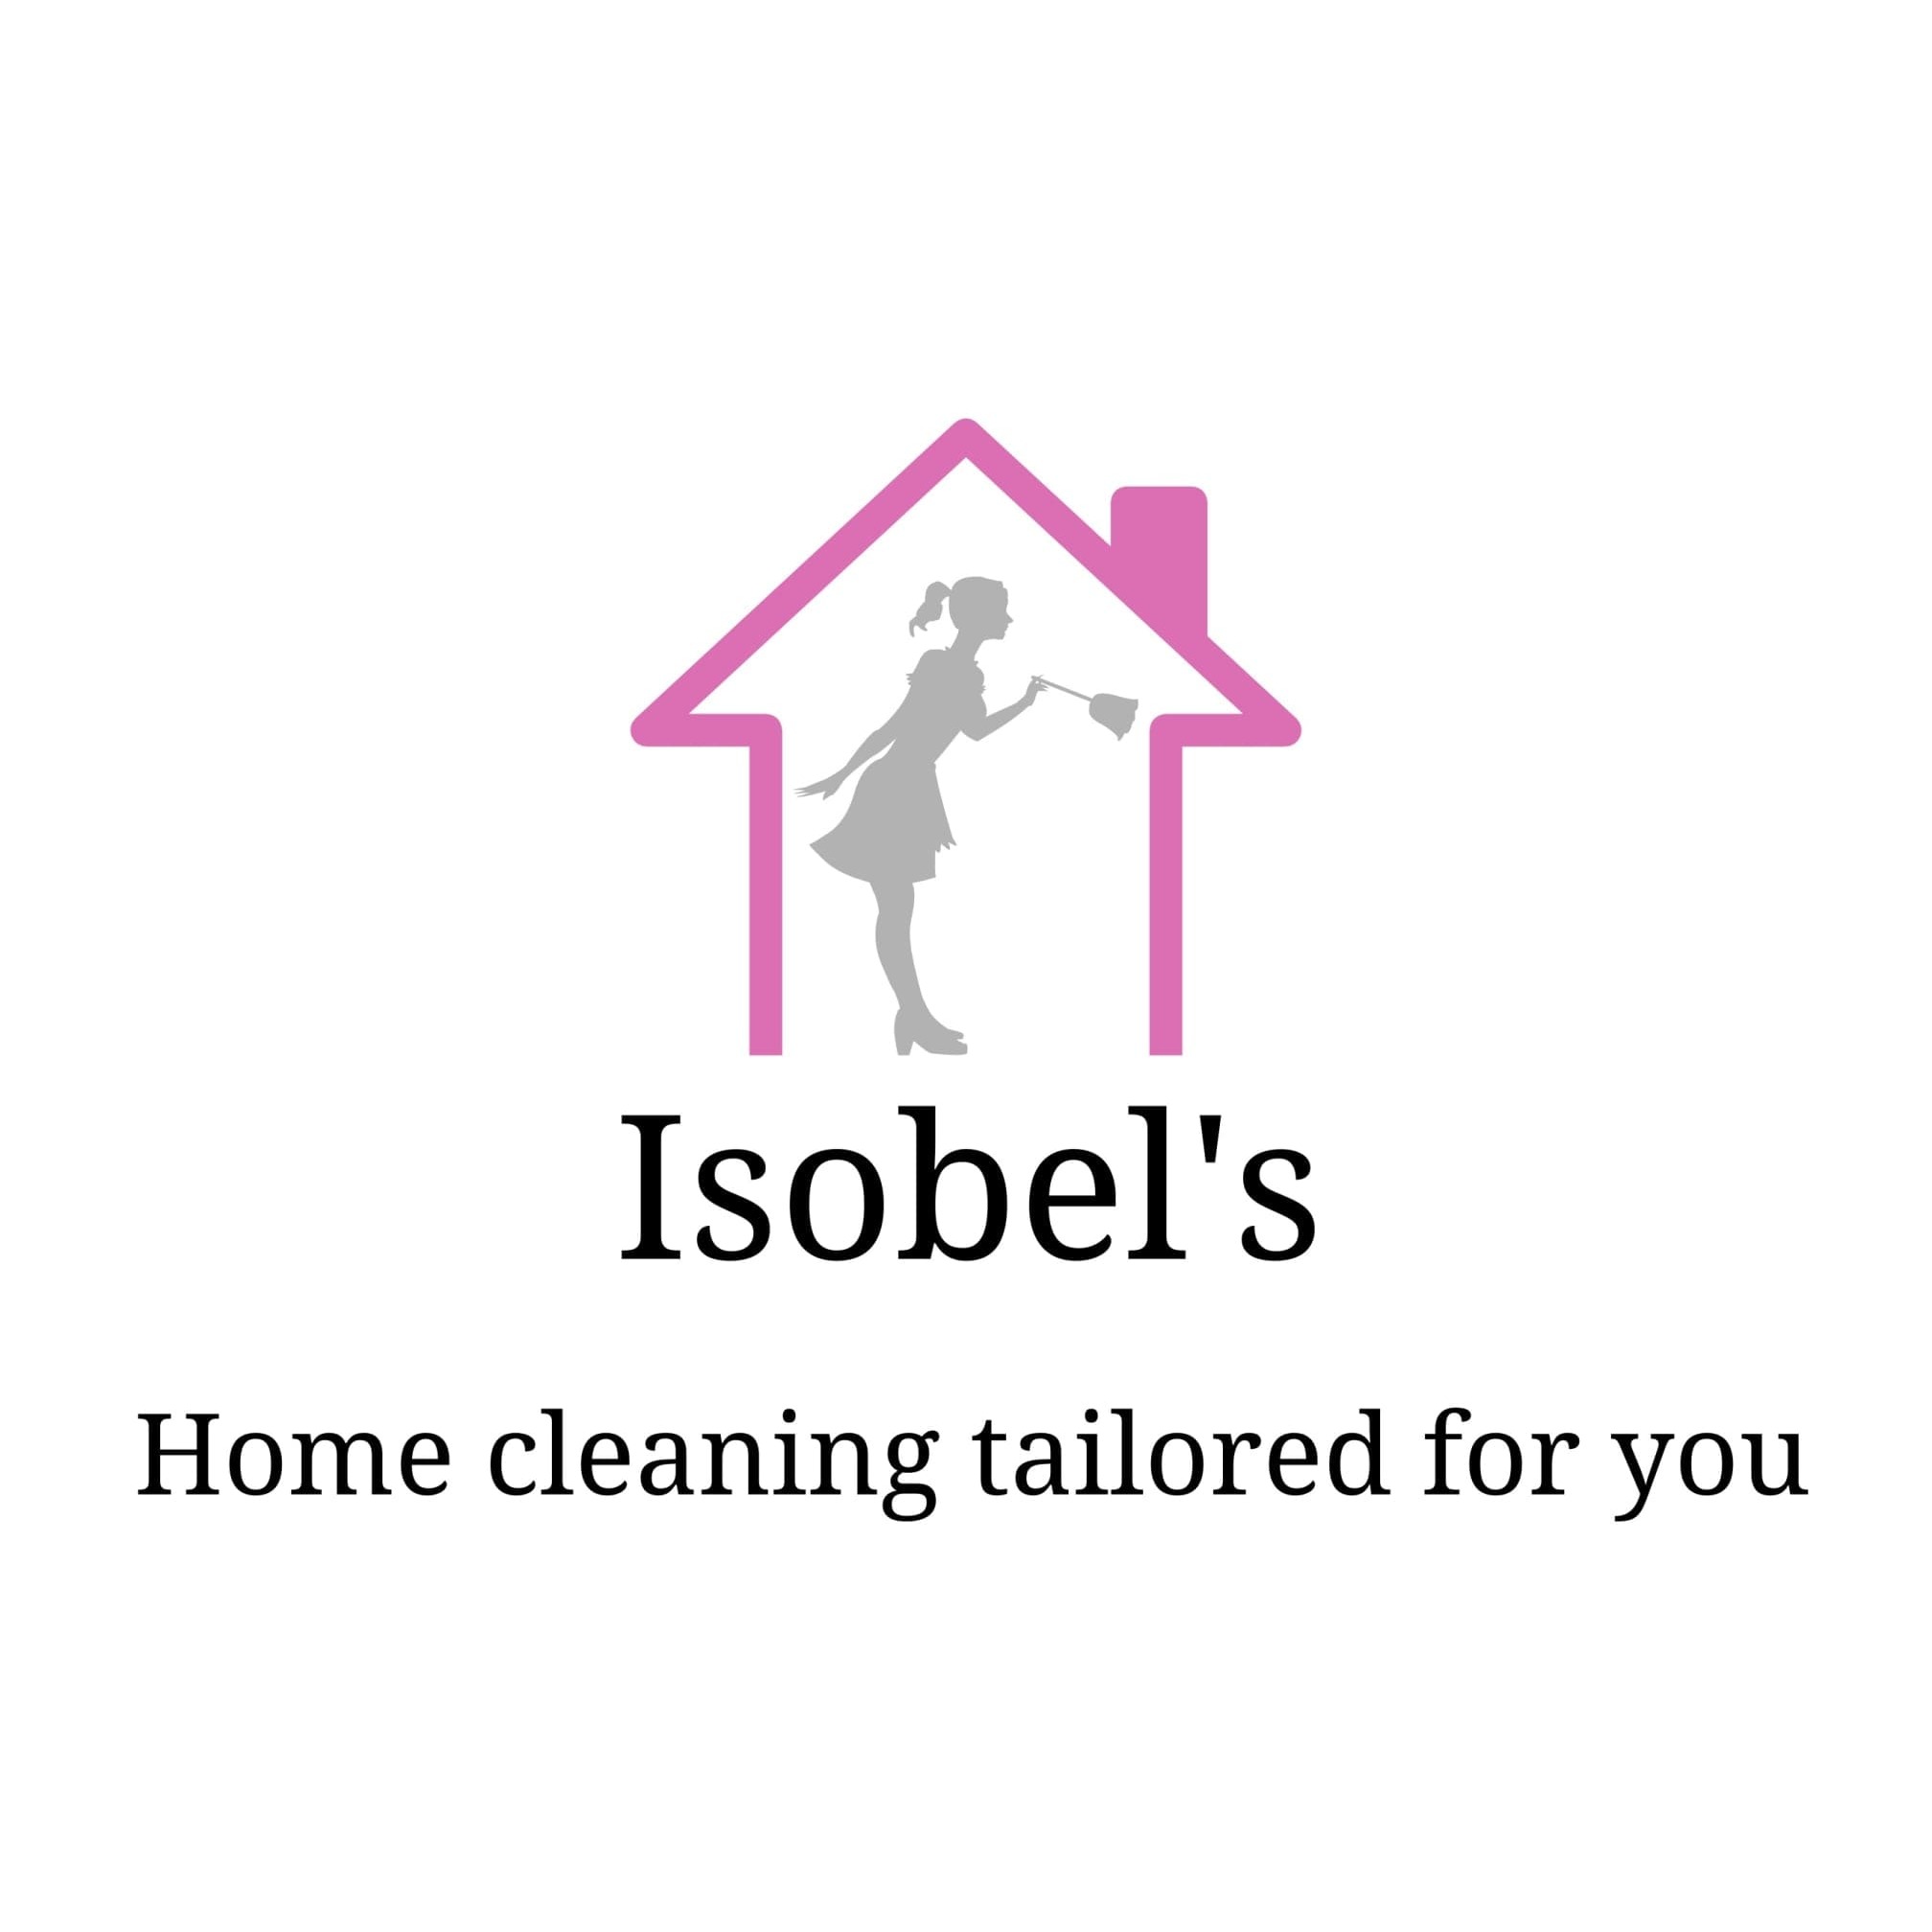 Isobel's Home Cleaning Service Logo